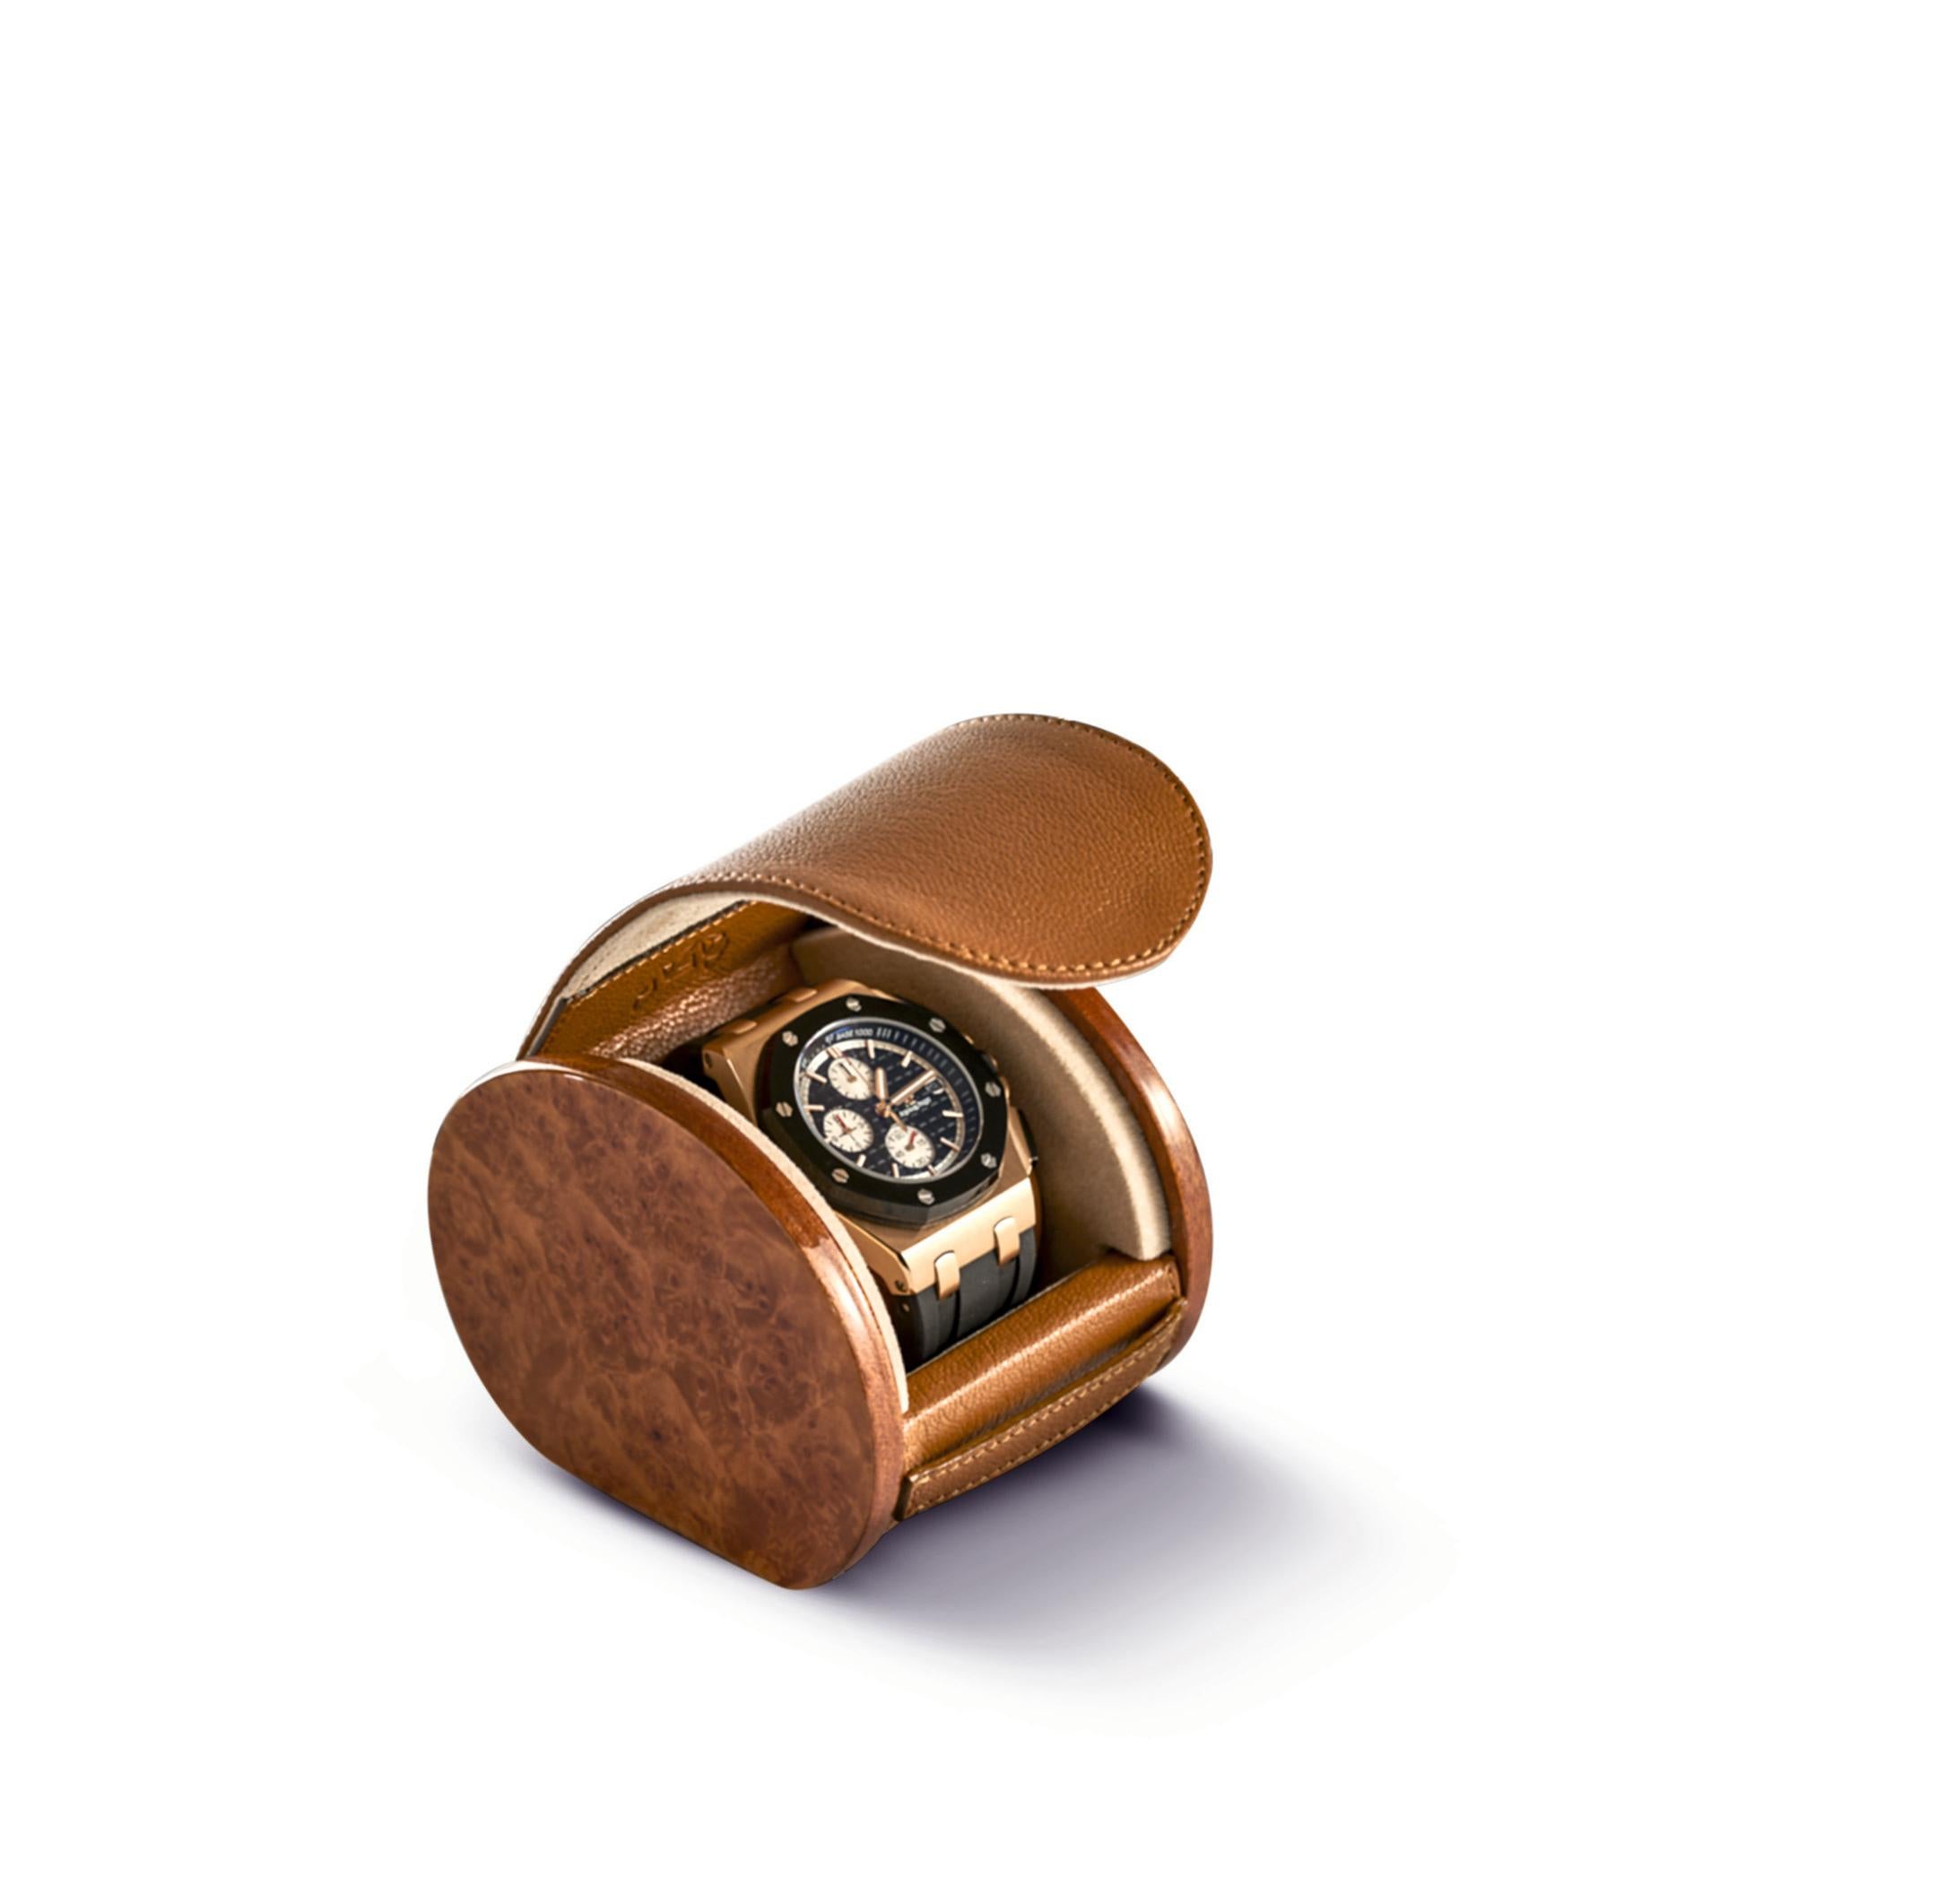 Travel leather watch case with capacity for 1 watch in the adjustable leather support. Available in three finishing options: Black leather with polished ebony sides, brown leather with polished briar sides, or red leather with polished red briar